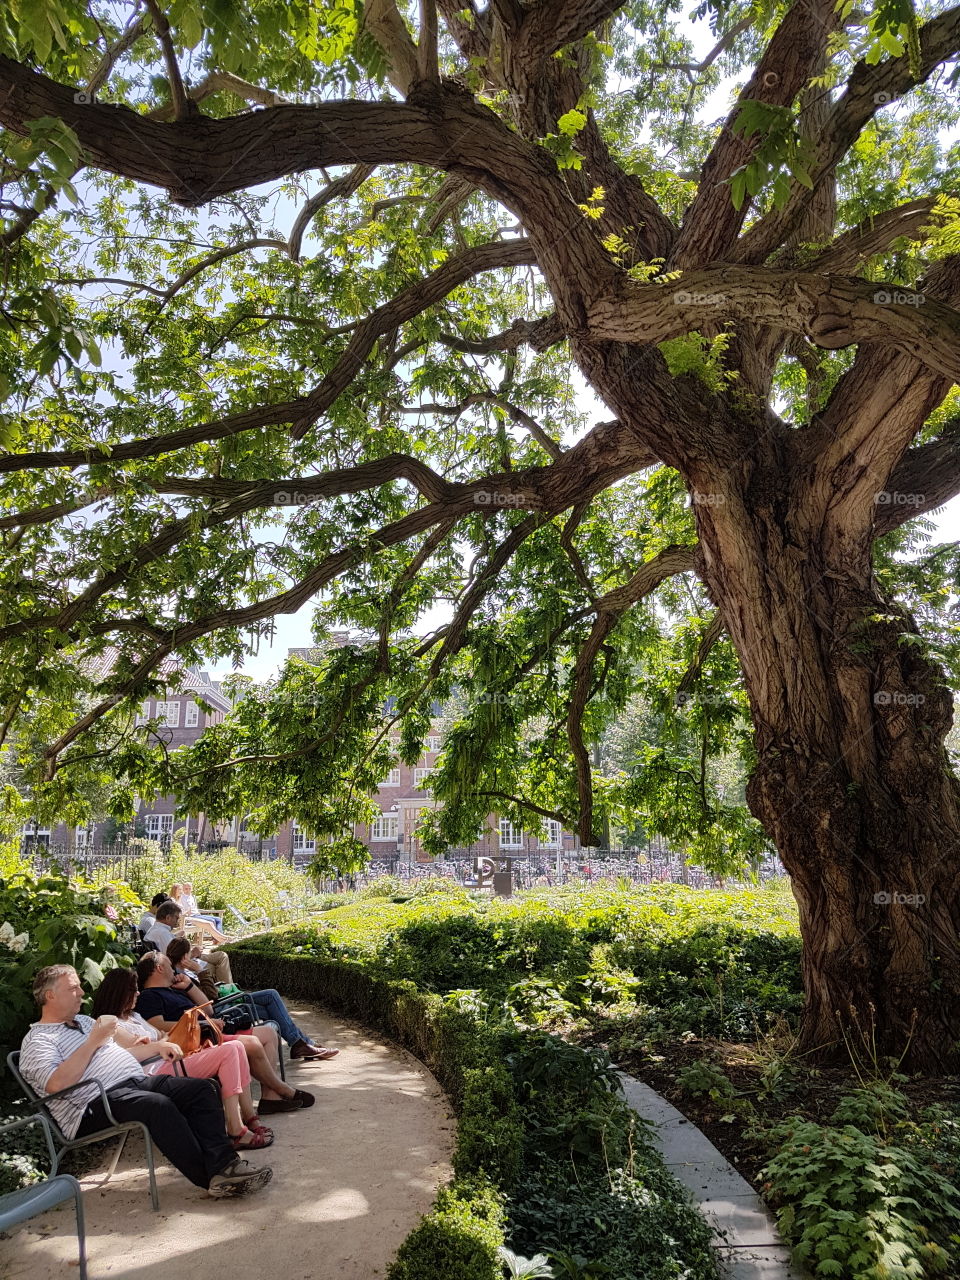 People sitting under a tree in summer, Amsterdam